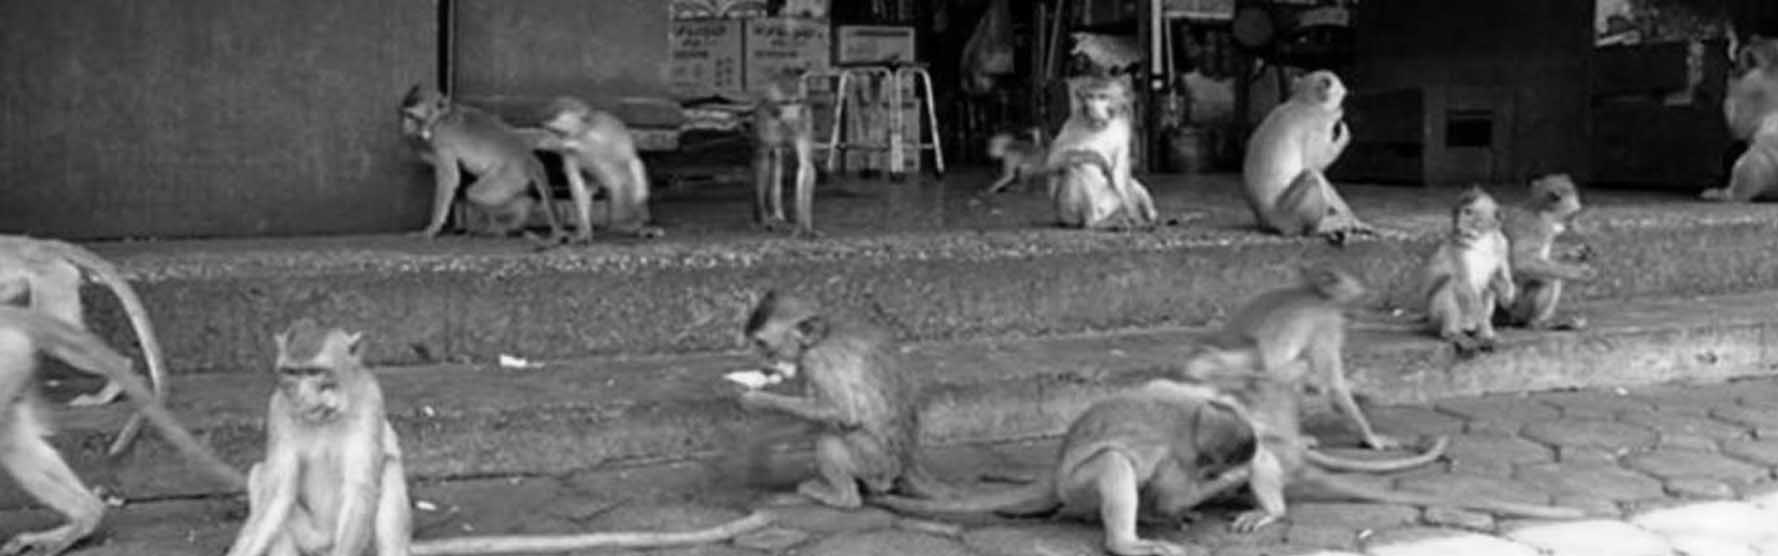 Editor's Choice: Thailand: Hungry monkeys create meyham in ancient city